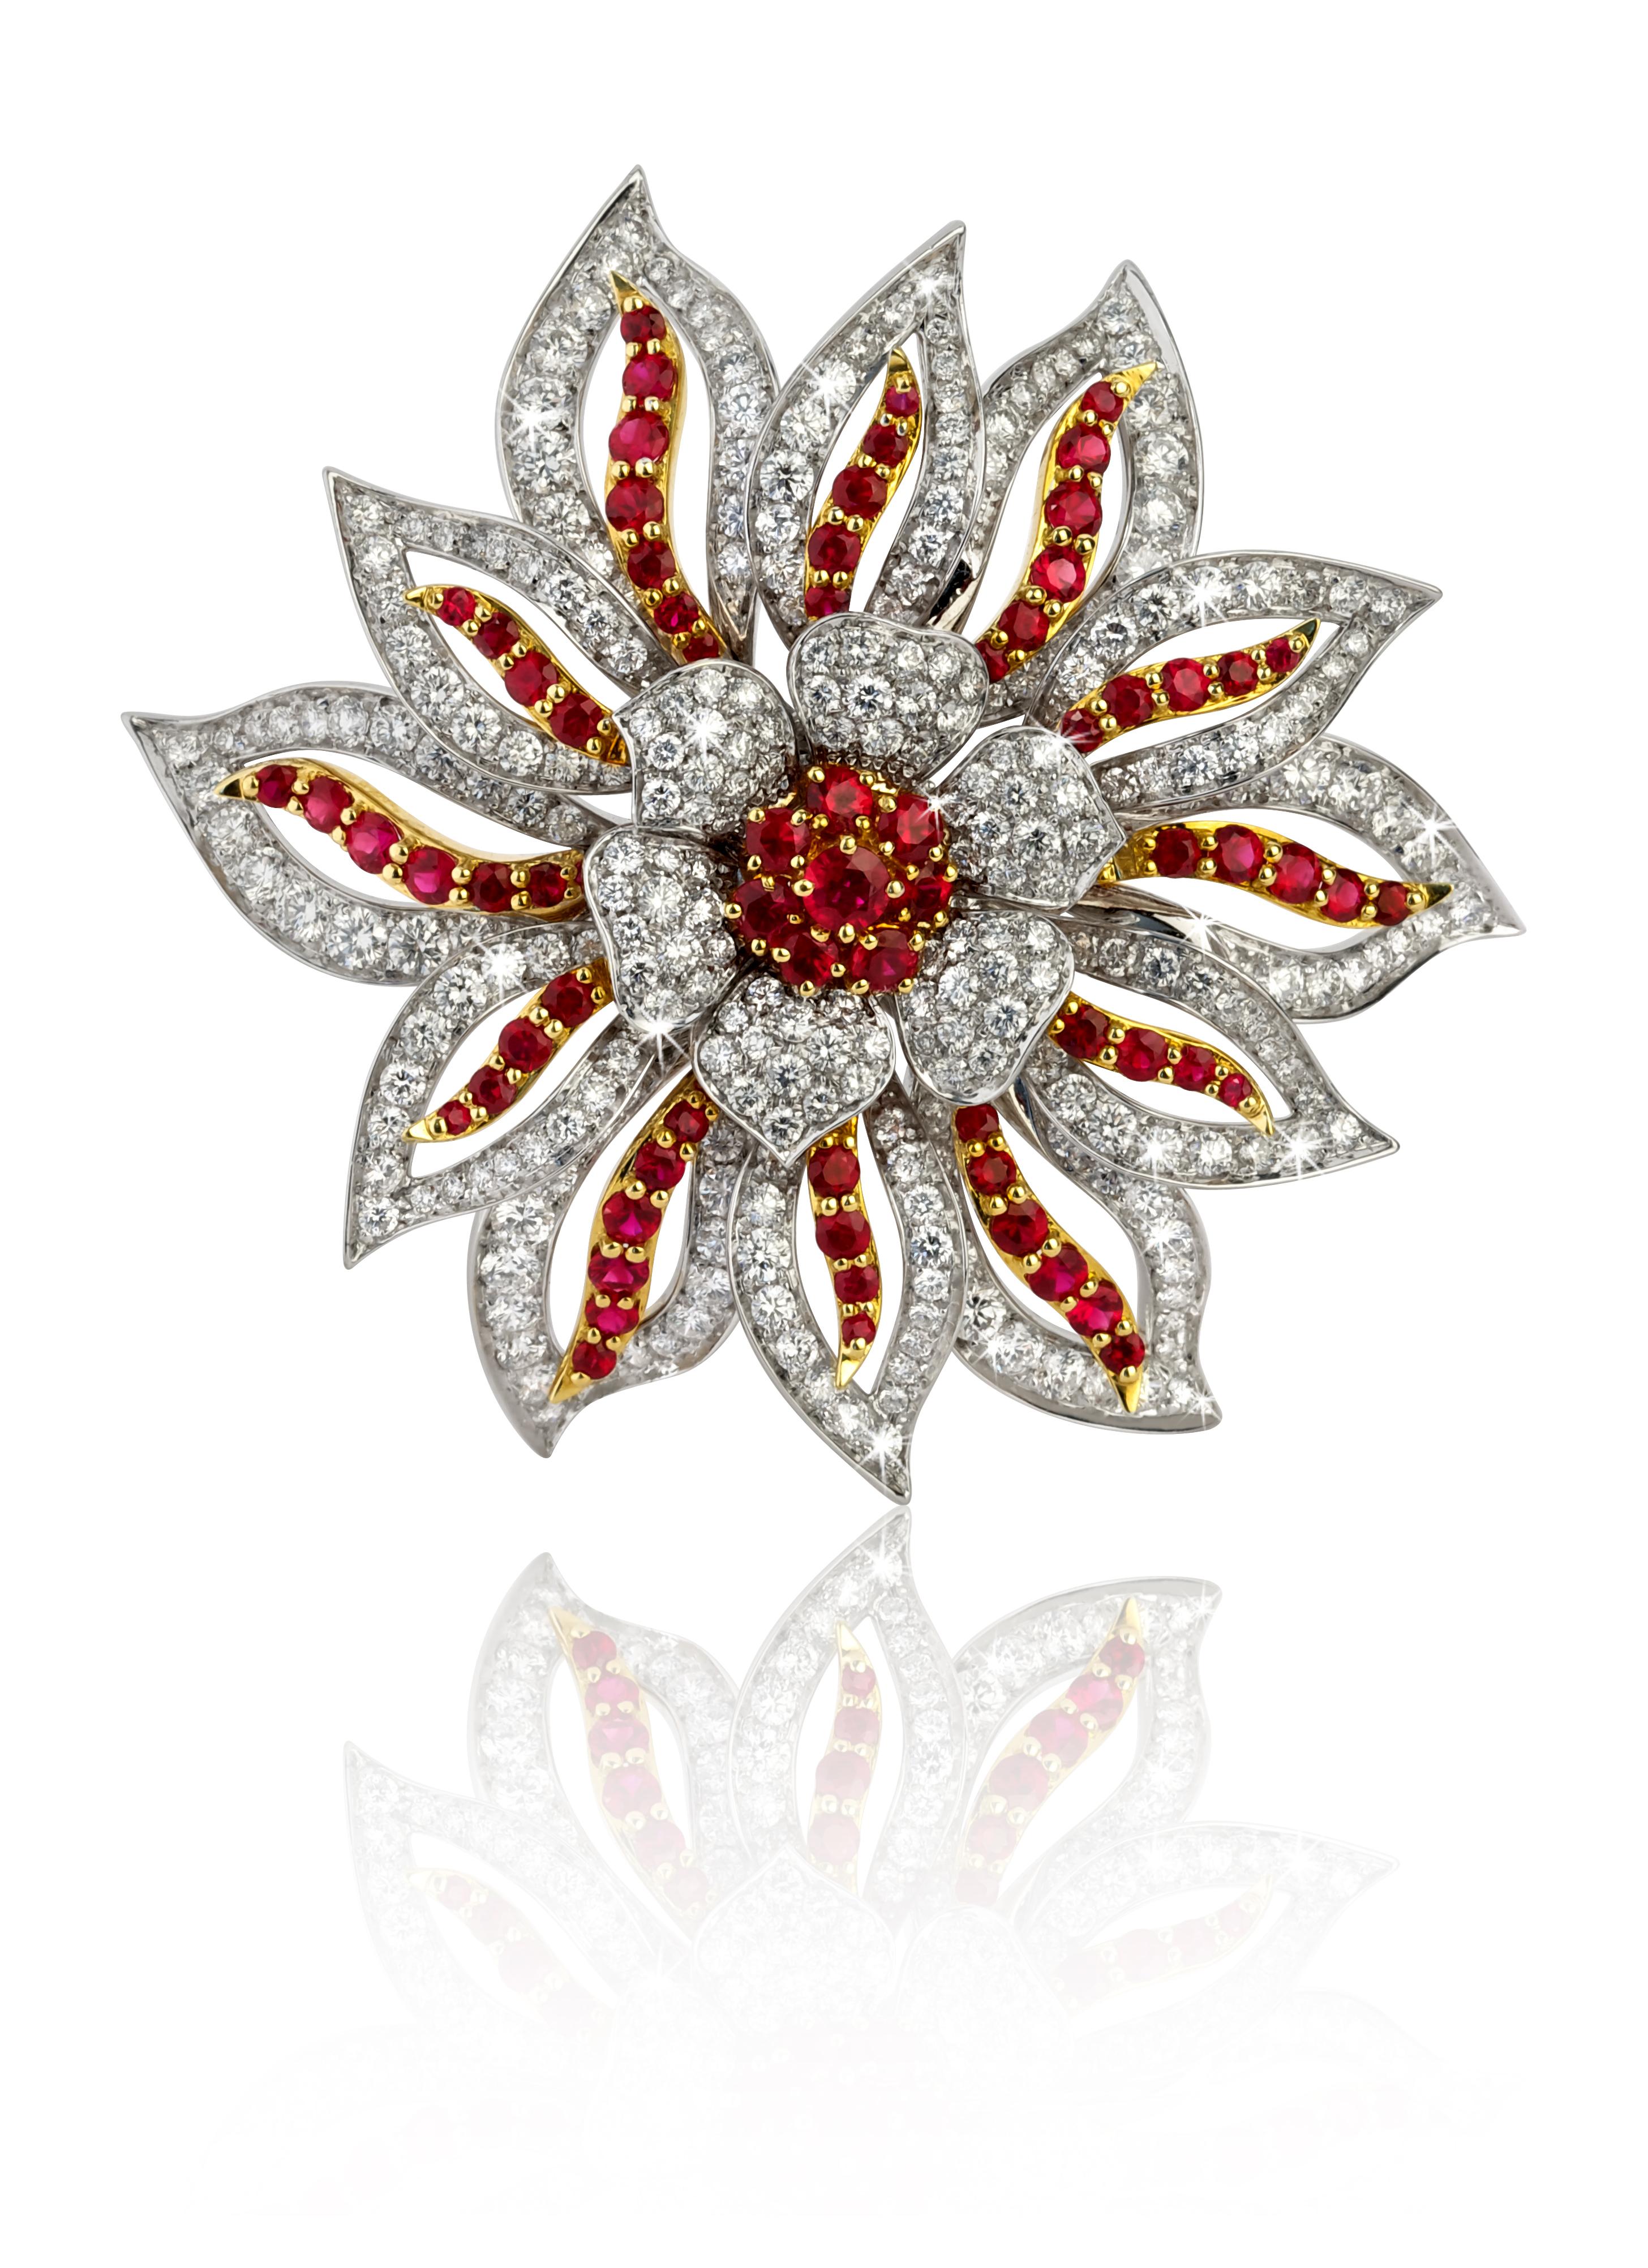 Vintage Brooch From ANGELETTI PRIVATE COLLECTION White and Yellow gold 18kt with Diamonds ct 8.59 and Rubies ct 5.20.
This Brooch was Manufactured in ‘60s in Italy by Expert Goldsmith from Valenza.
The Ruby are Set on Yellow gold to enhance their